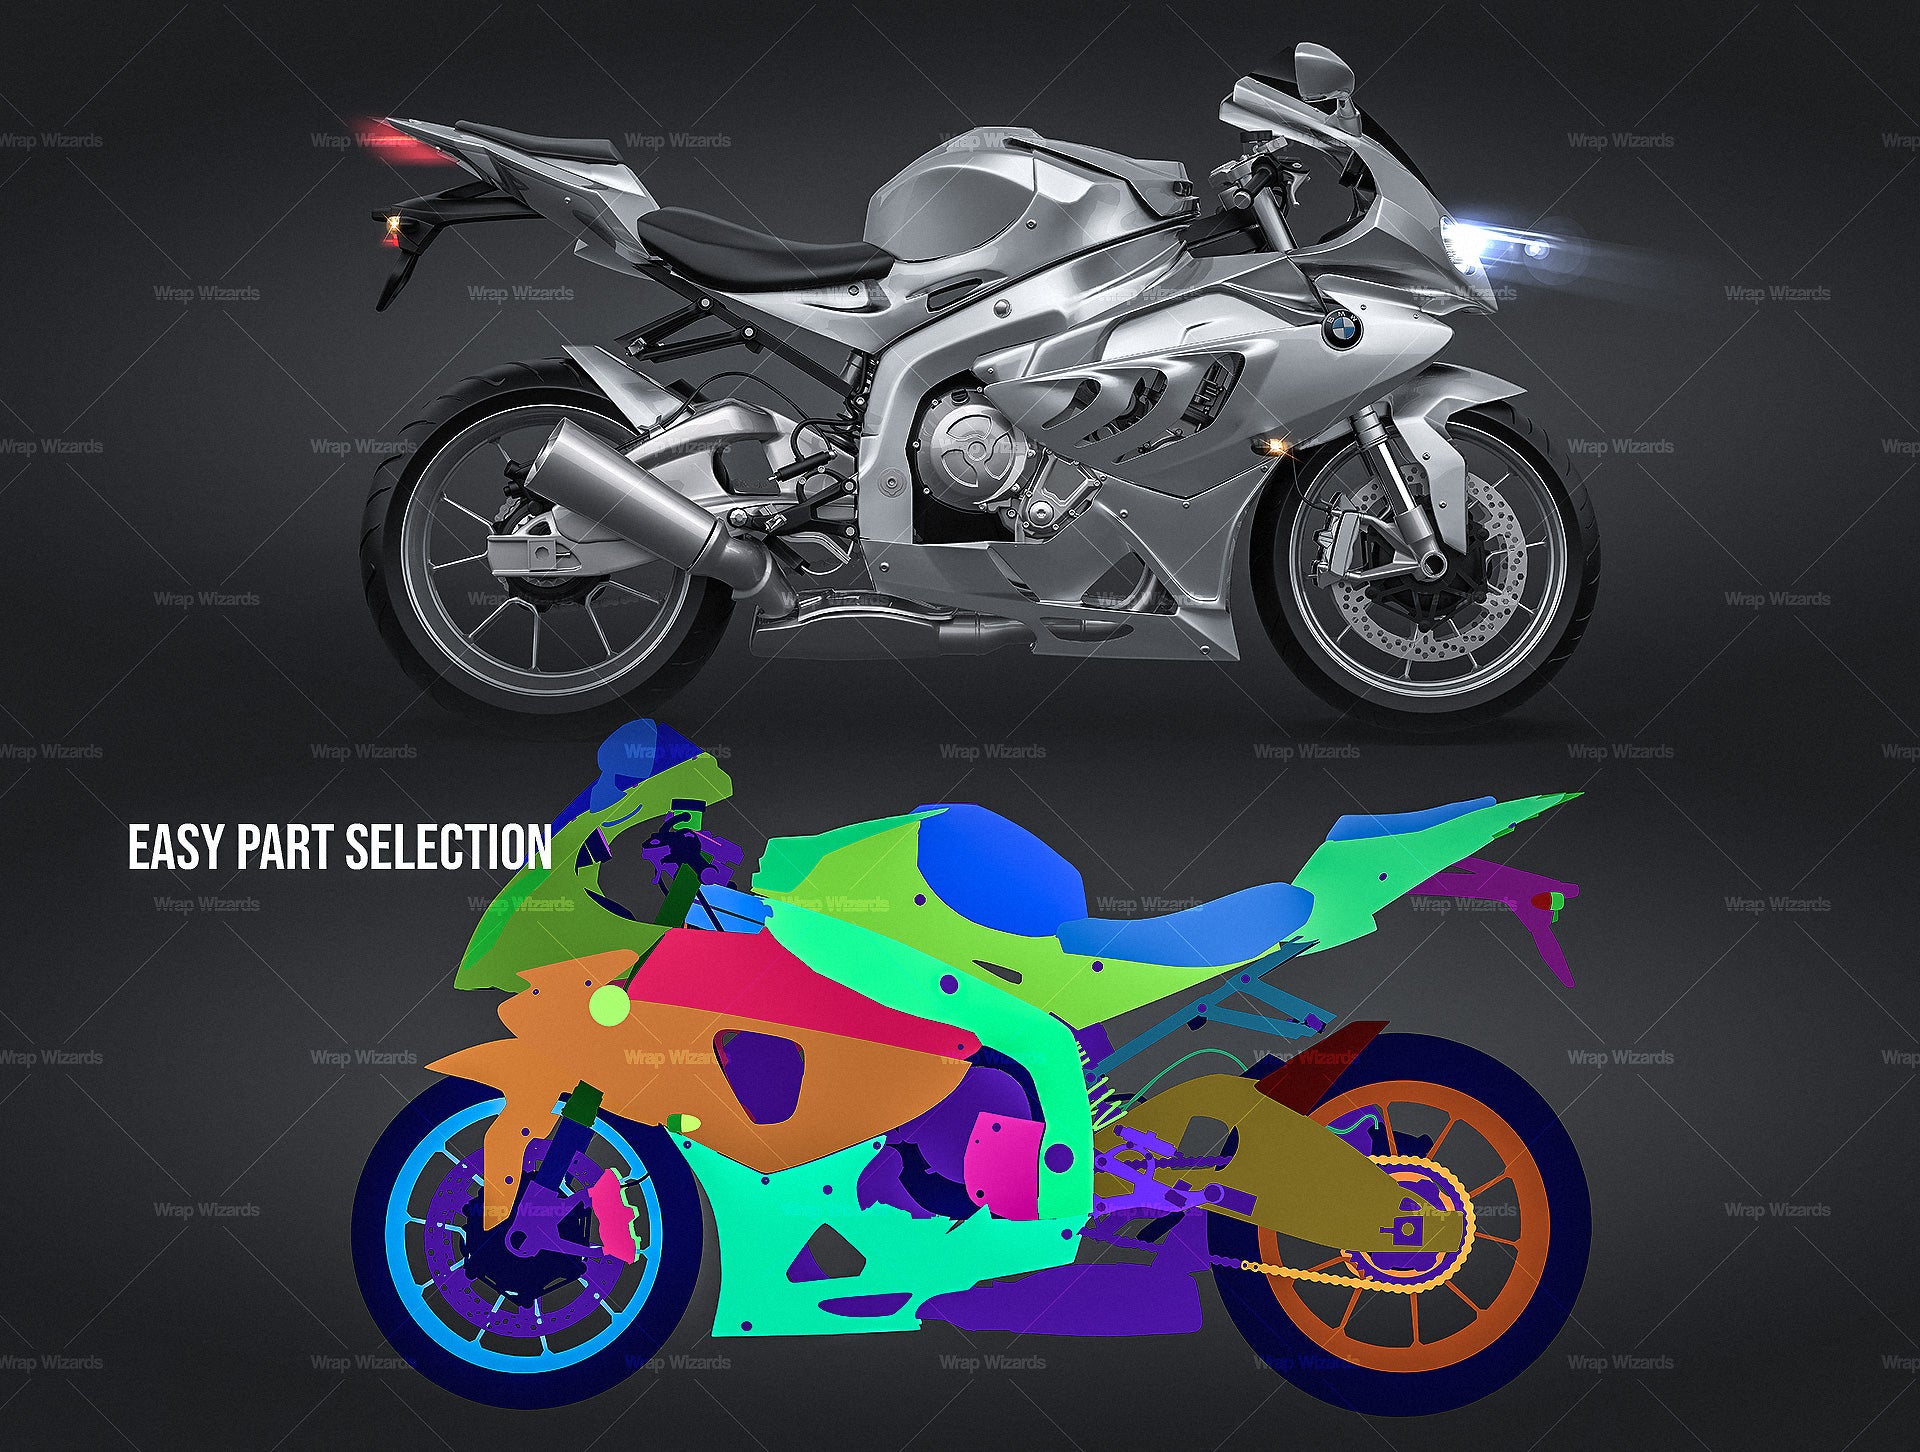 BMW S1000RR 2011 glossy finish - all sides Motorcycle Mockup Template.psd